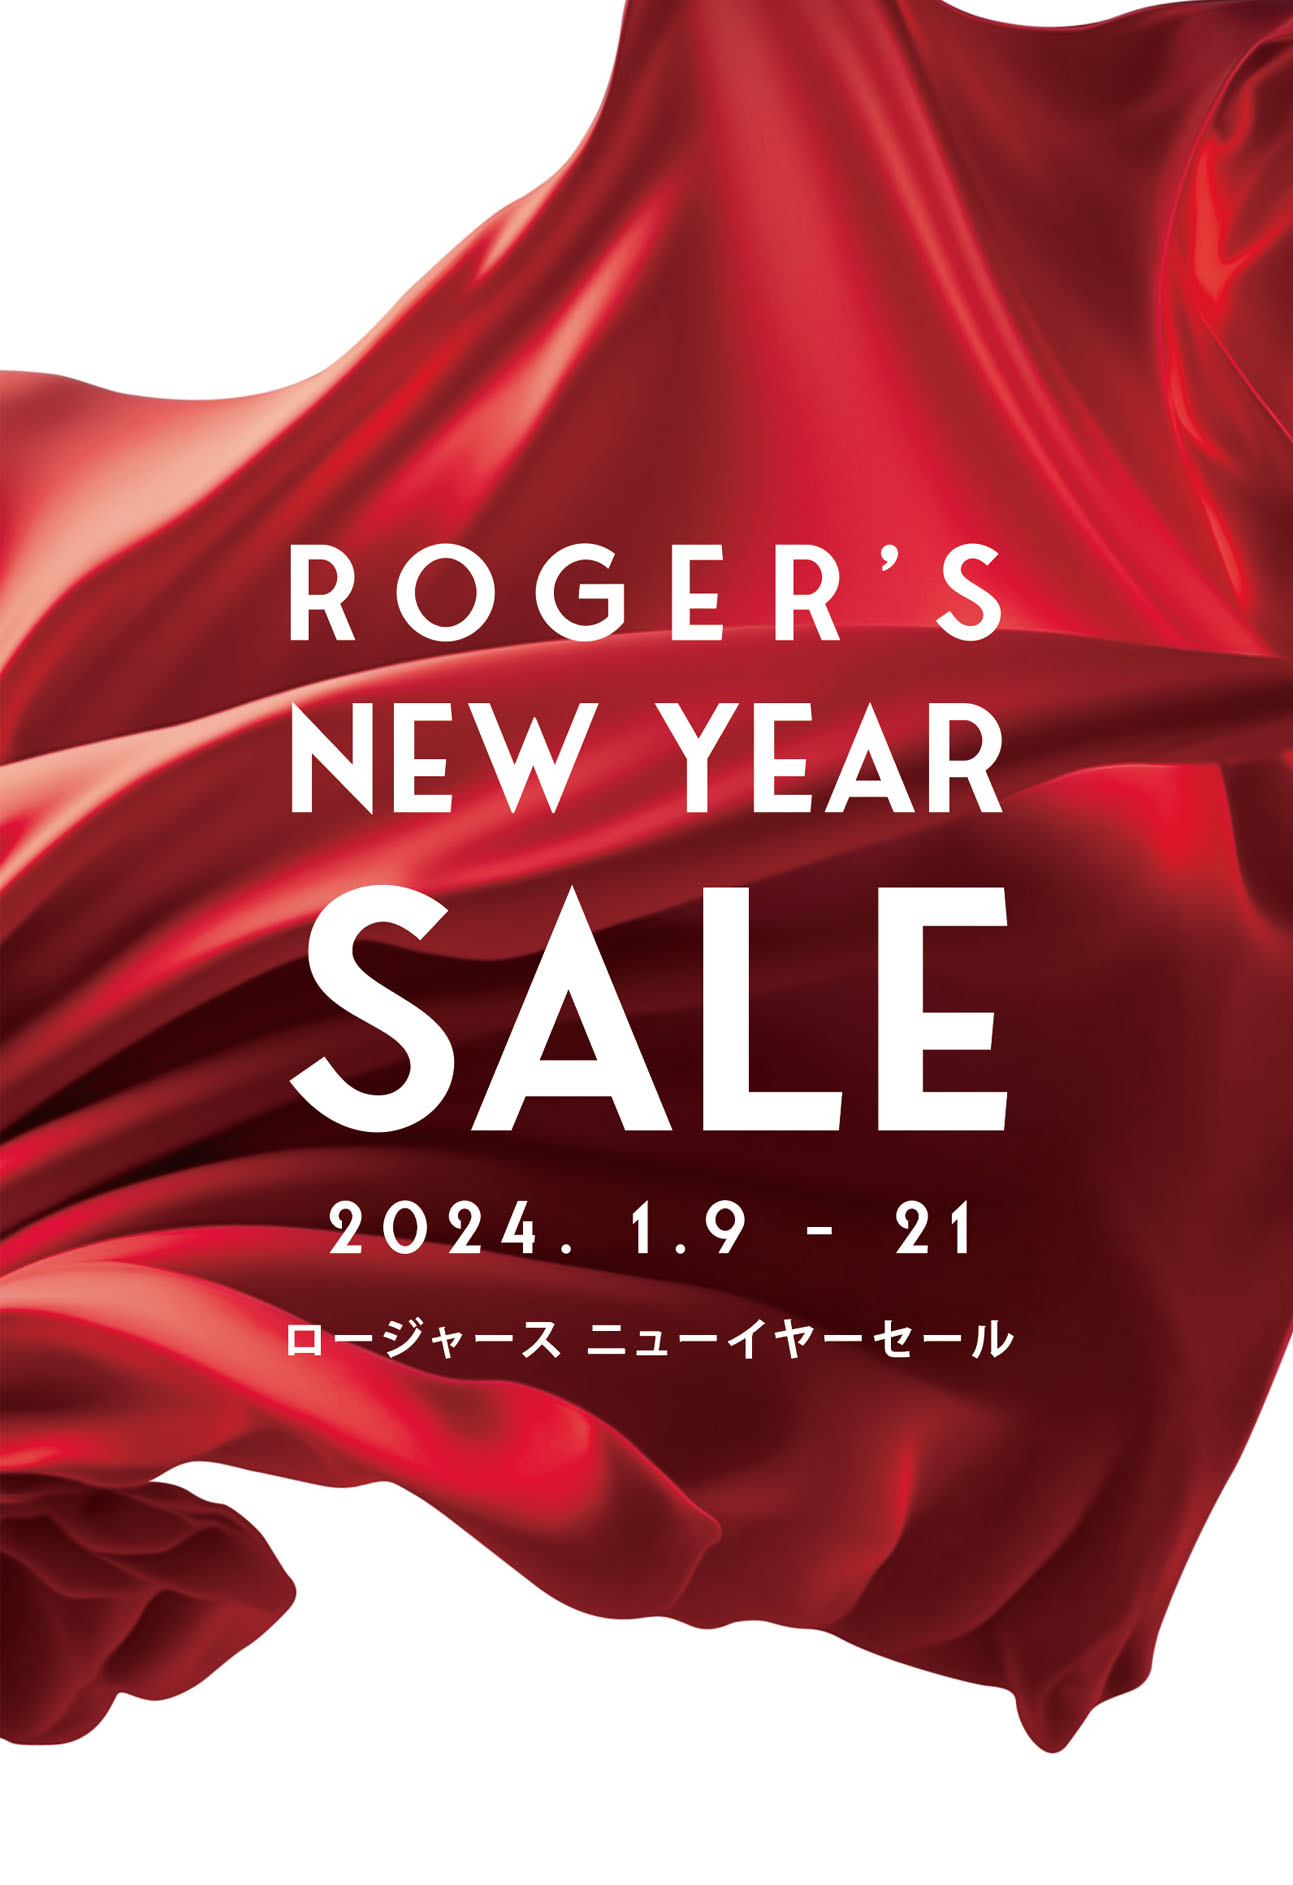 ROGER'S NEW YEAR SALE! 1月21日まで!